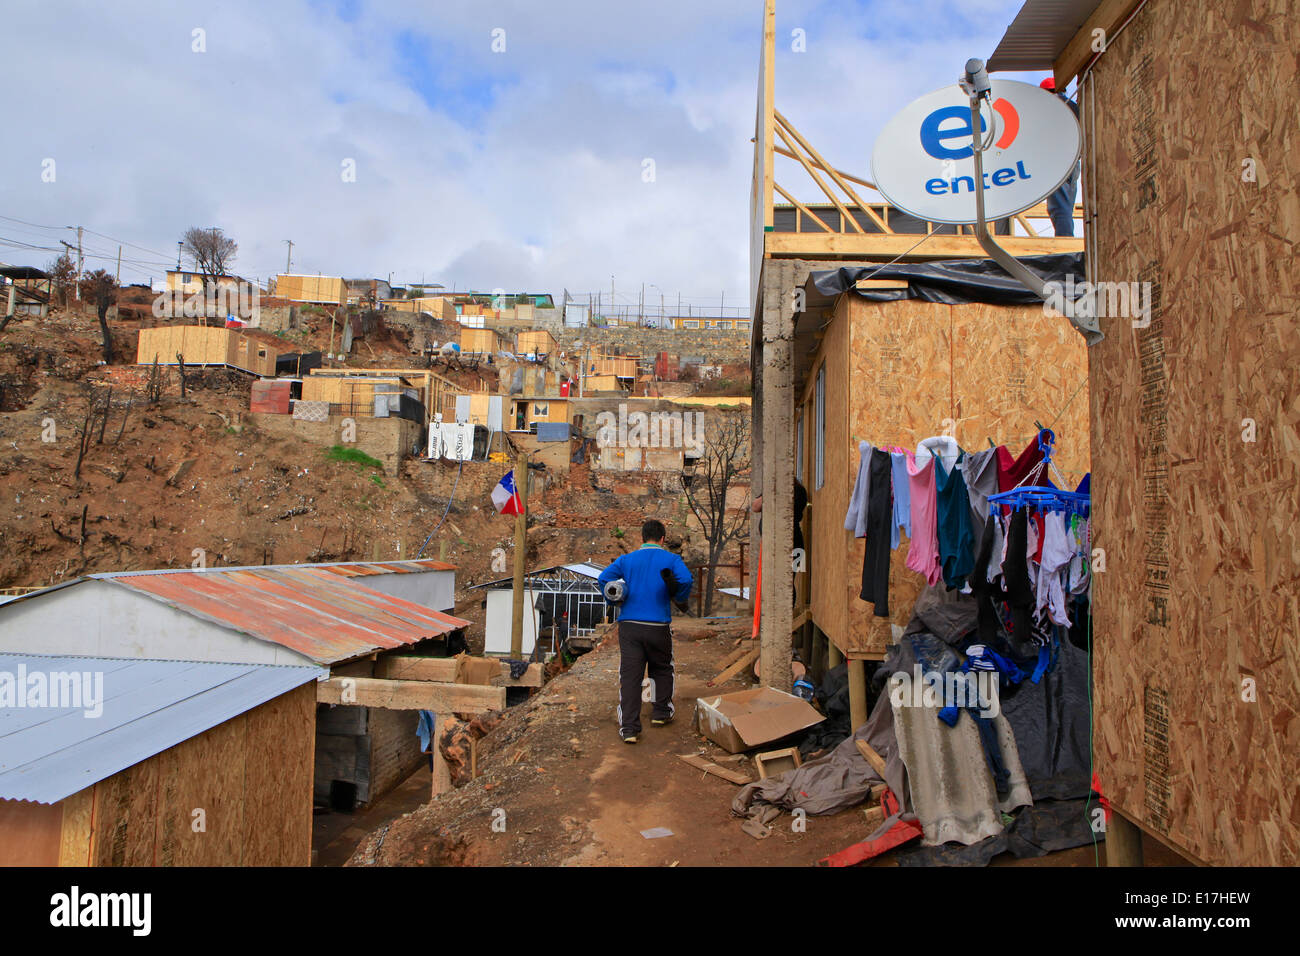 Valparaiso, after the big fire, rebuilding people`s houses  Chile 2014 Stock Photo